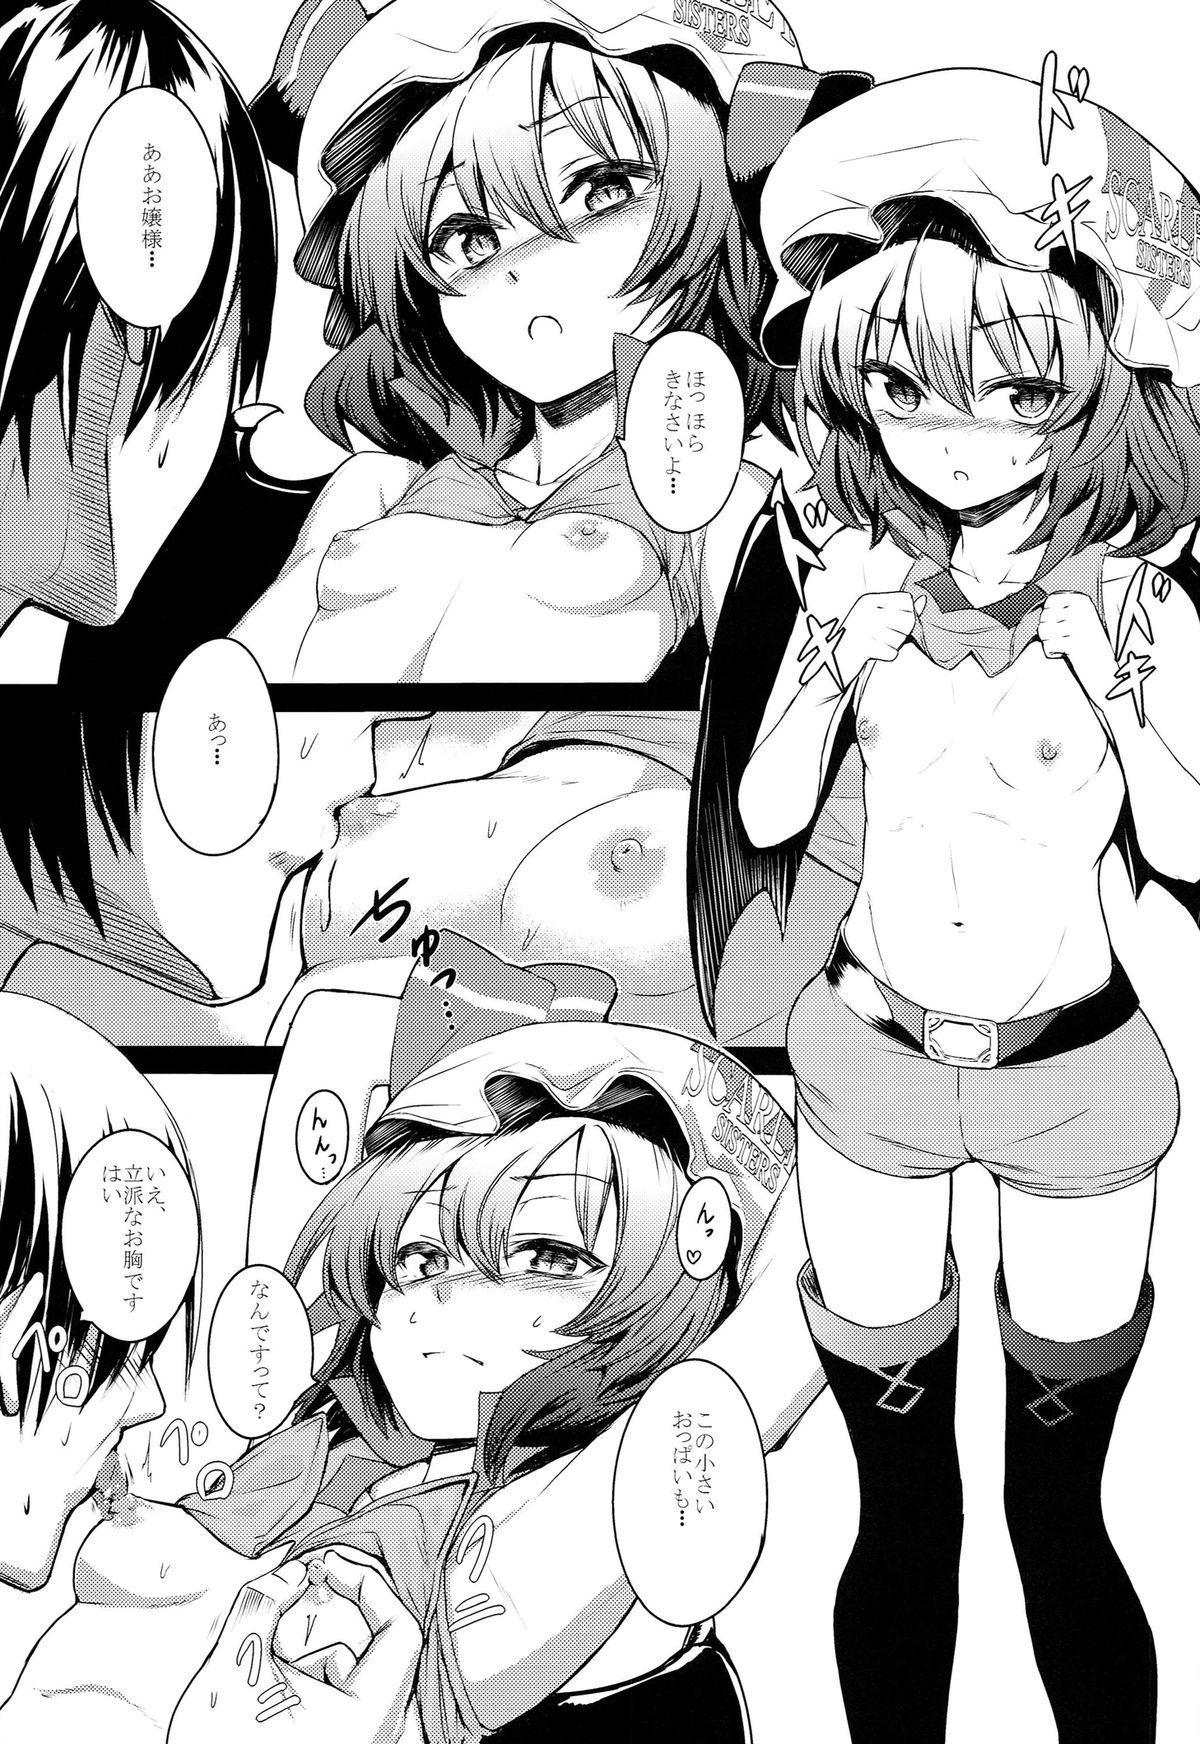 French TOUHOU RACE QUEENS COLLABO CLUB - Touhou project Fuck For Money - Page 6